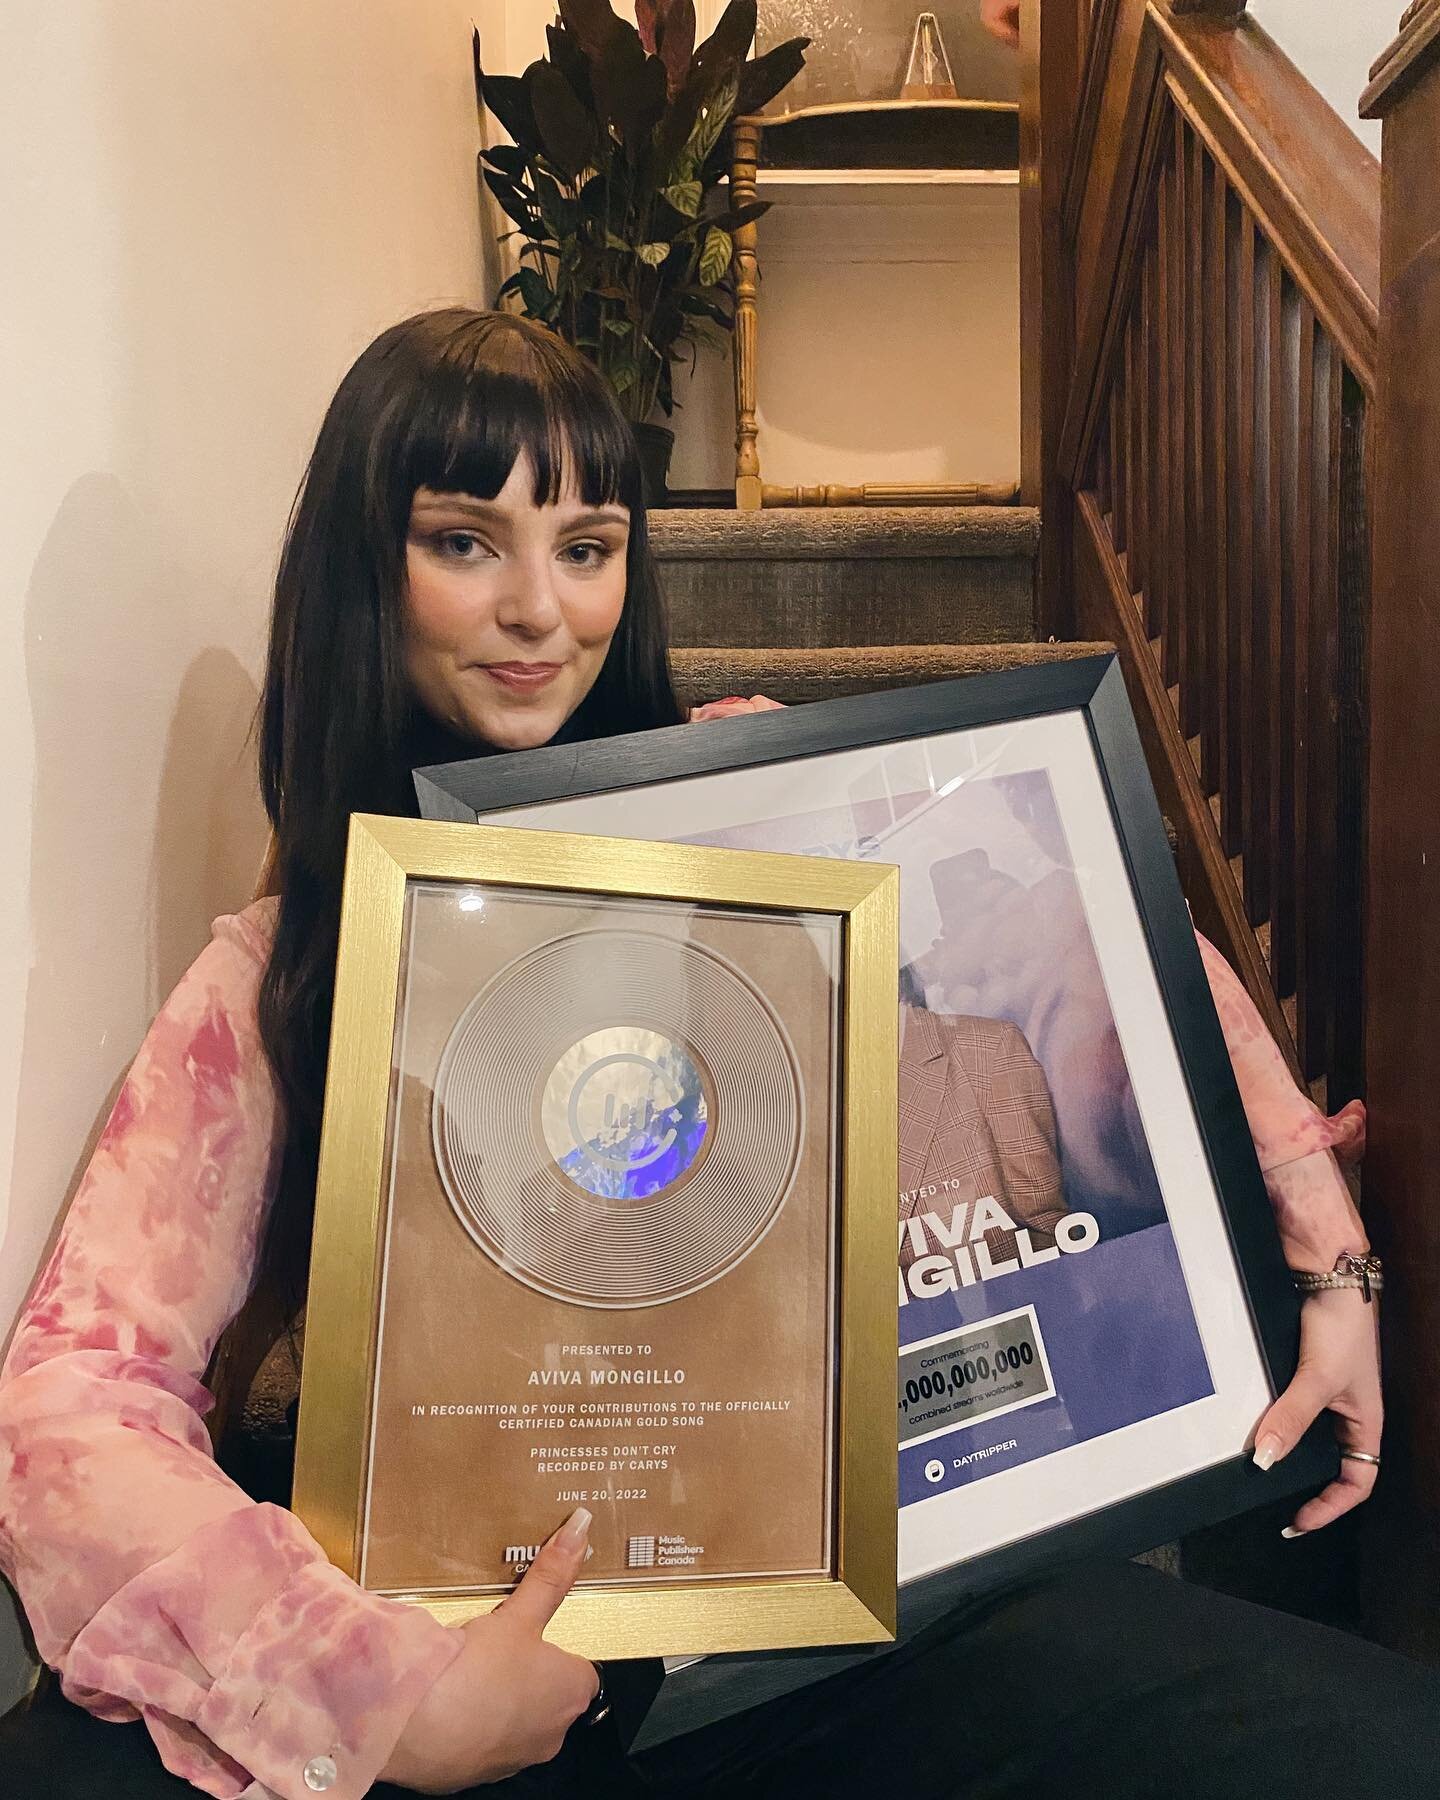 Last night we presented @carysofficial with her first gold songwriting award for &ldquo;Princesses Don&rsquo;t Cry&rdquo; as well as a plaque commemorating 1 BILLION streams of her entire catalogue worldwide!